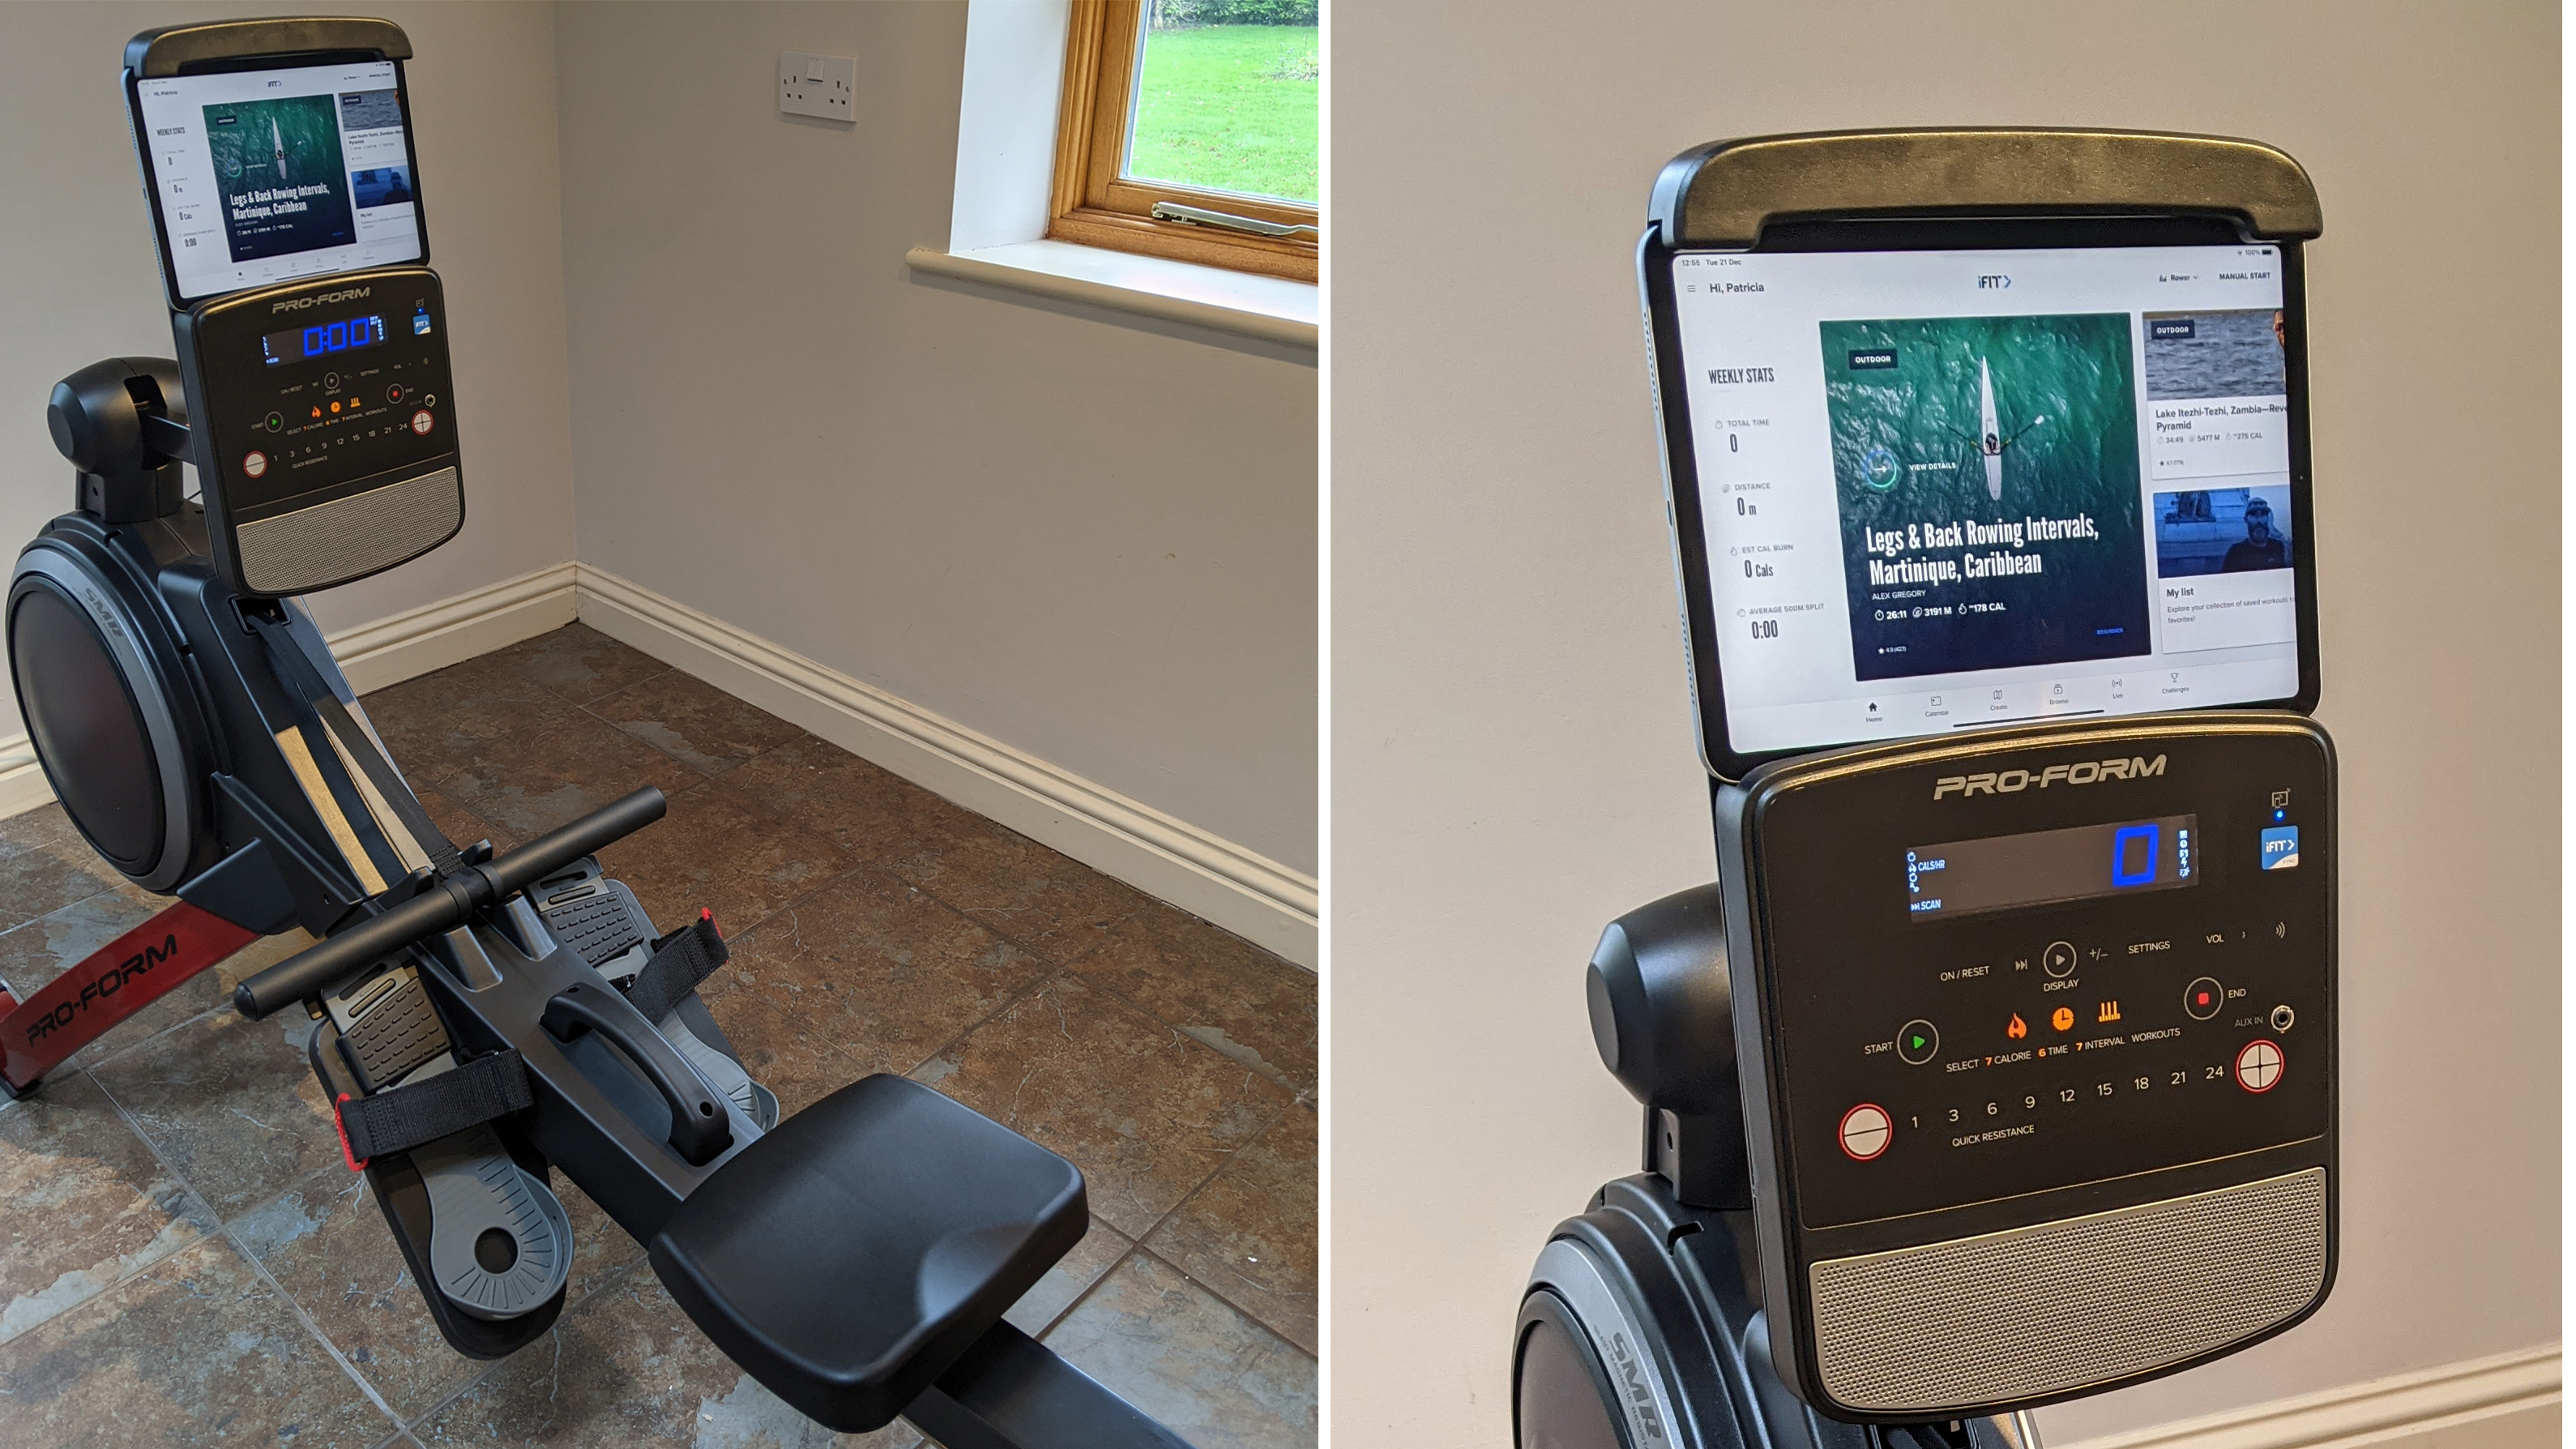 Proform 750R collage image, showing the body of the rower and close up of the screen